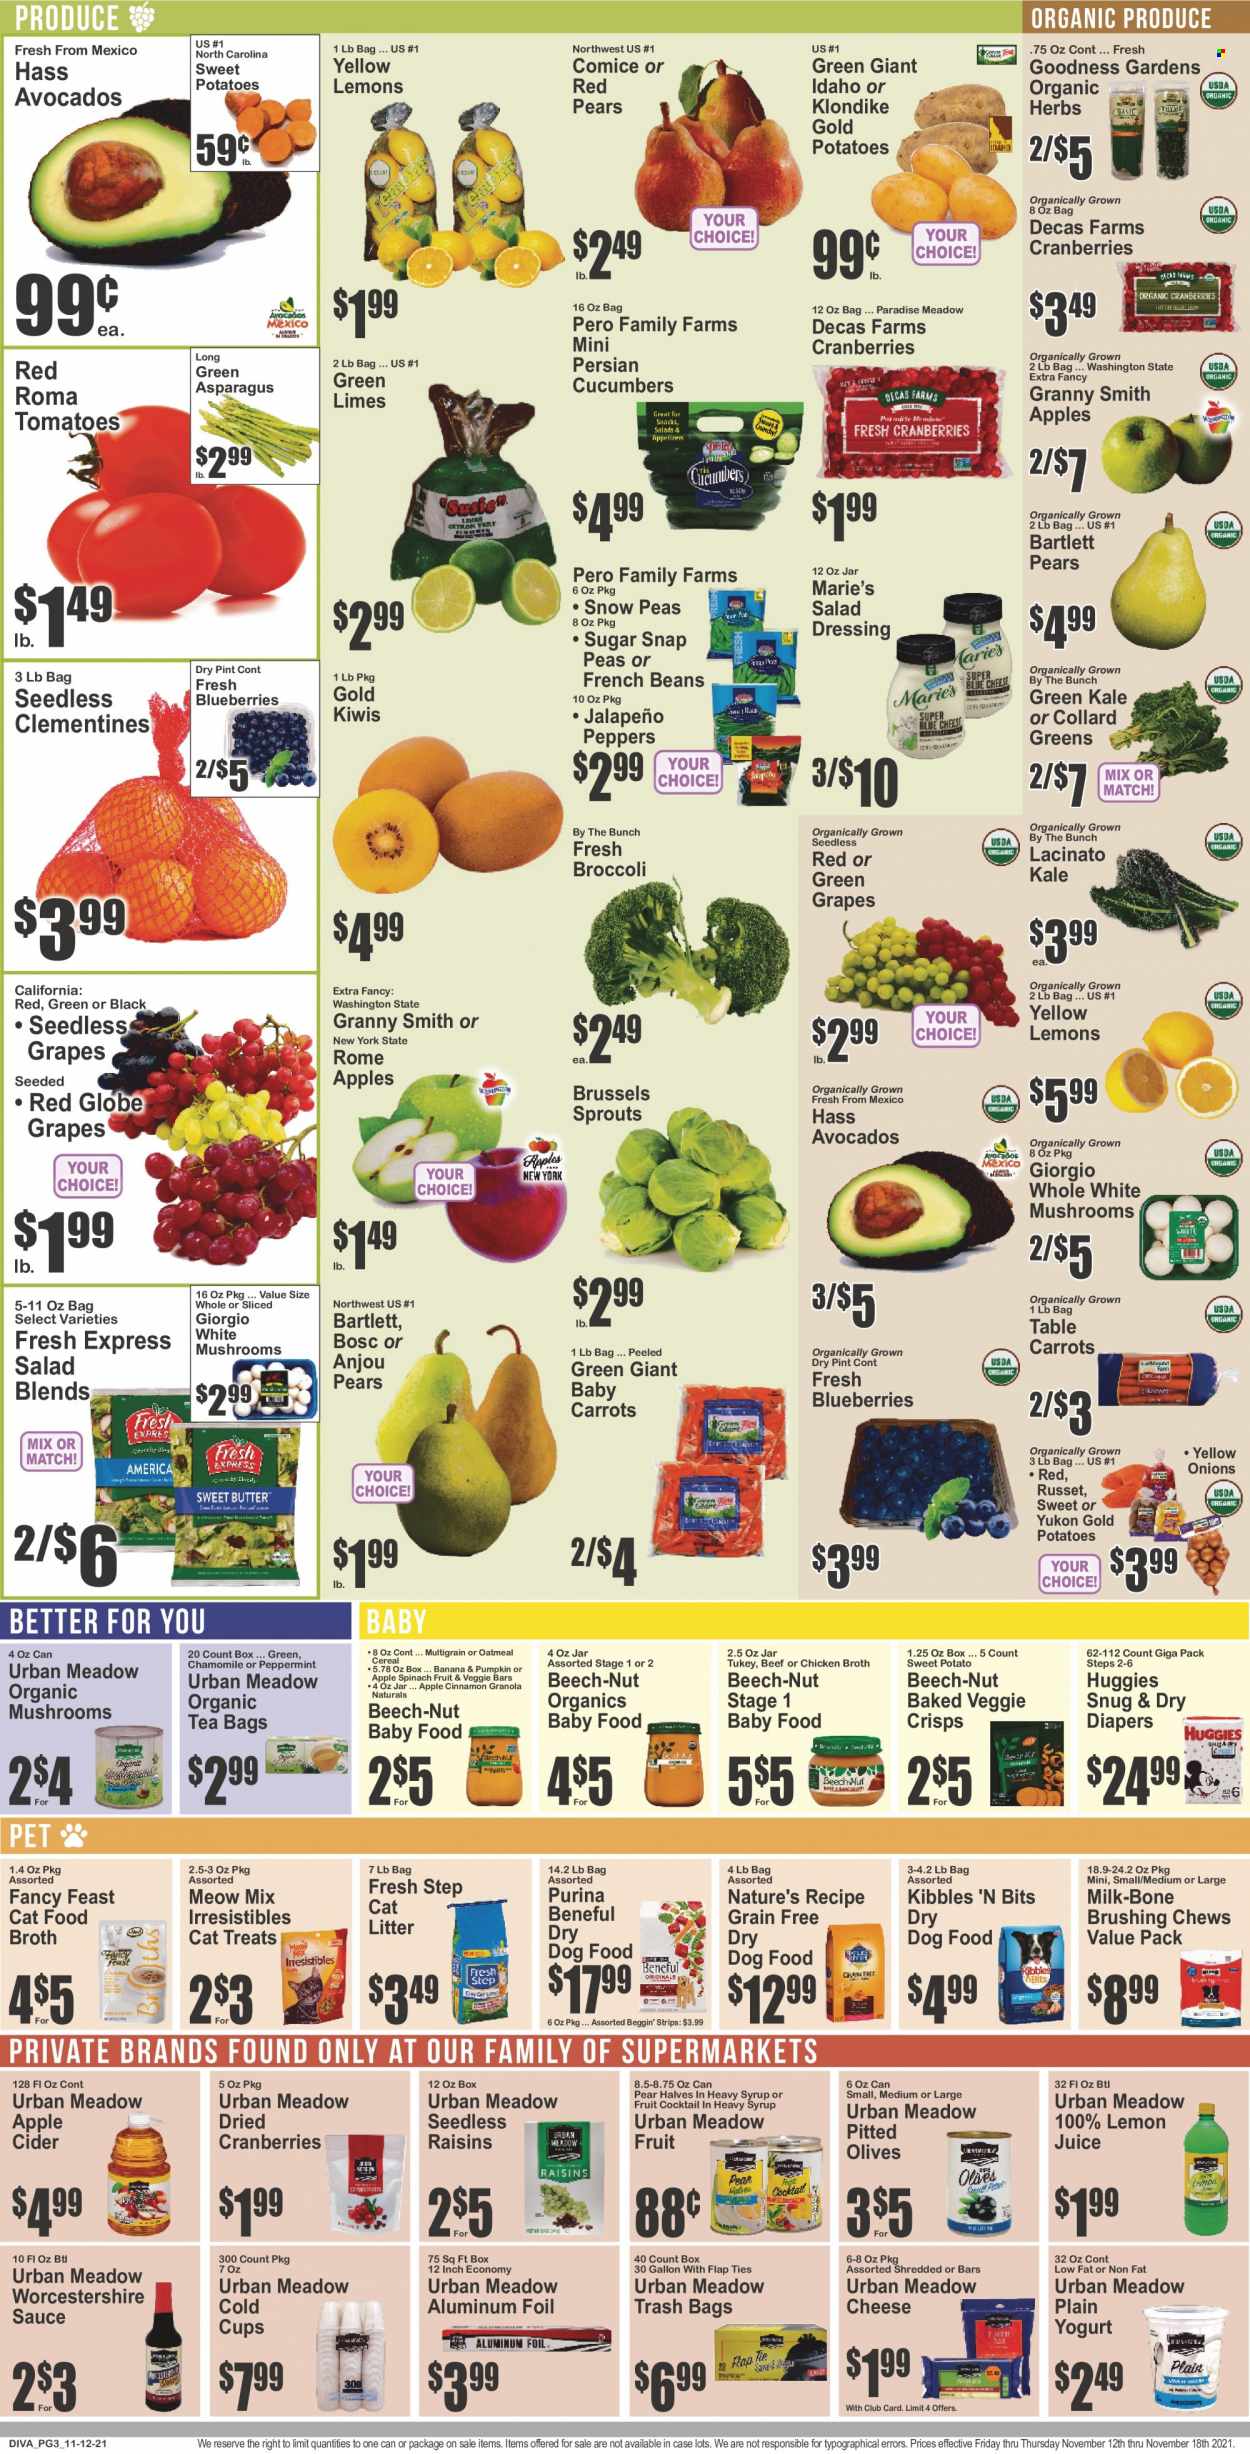 thumbnail - Key Food Flyer - 11/12/2021 - 11/18/2021 - Sales products - Bartlett pears, seedless grapes, beans, broccoli, cucumber, collard greens, french beans, russet potatoes, tomatoes, kale, potatoes, onion, jalapeño, brussel sprouts, avocado, grapes, kiwi, limes, Red Globe, pears, Granny Smith, sauce, yoghurt, milk, snap peas, snow peas, strips, chewing gum, chicken broth, oatmeal, broth, cranberries, olives, cereals, granola, cinnamon, salad dressing, worcestershire sauce, dressing, syrup, raisins, lemon juice, tea bags, apple cider, cider, Huggies, nappies, trash bags, cup, cat litter, animal food, cat food, dog food, Purina, dry dog food, Meow Mix, Beggin', Fancy Feast, Fresh Step, clementines. Page 3.